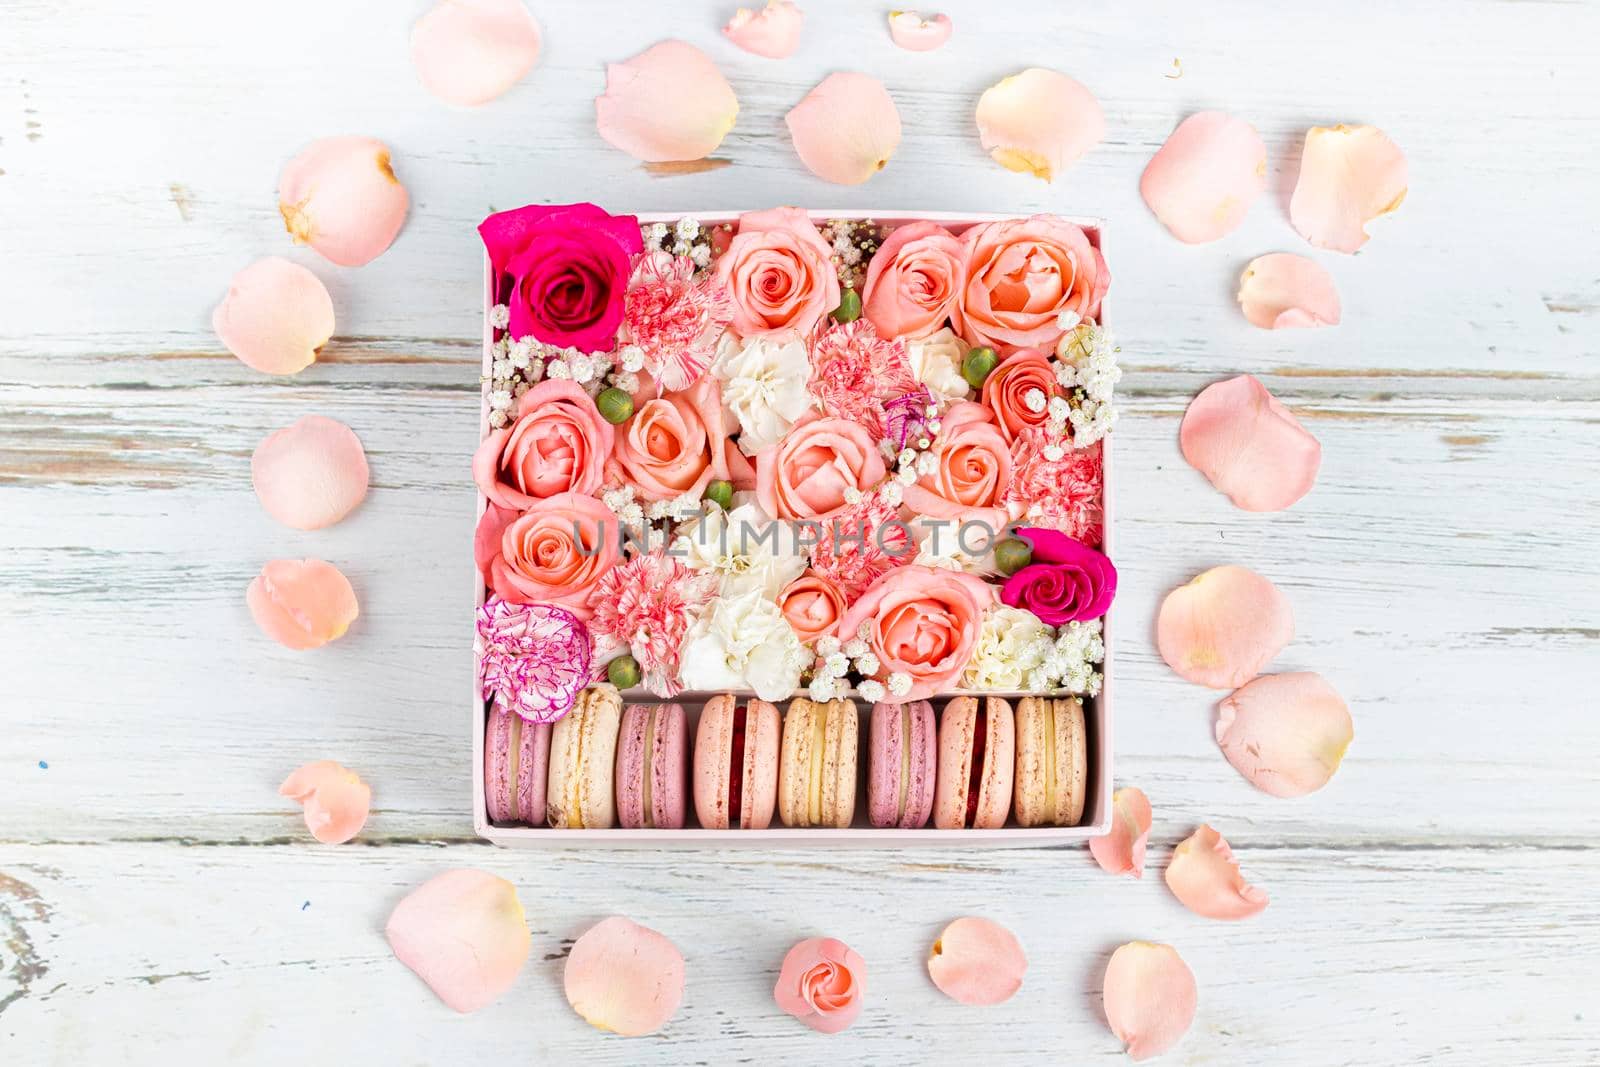 Floral arrangement of pink roses with macarons of different colors by eagg13